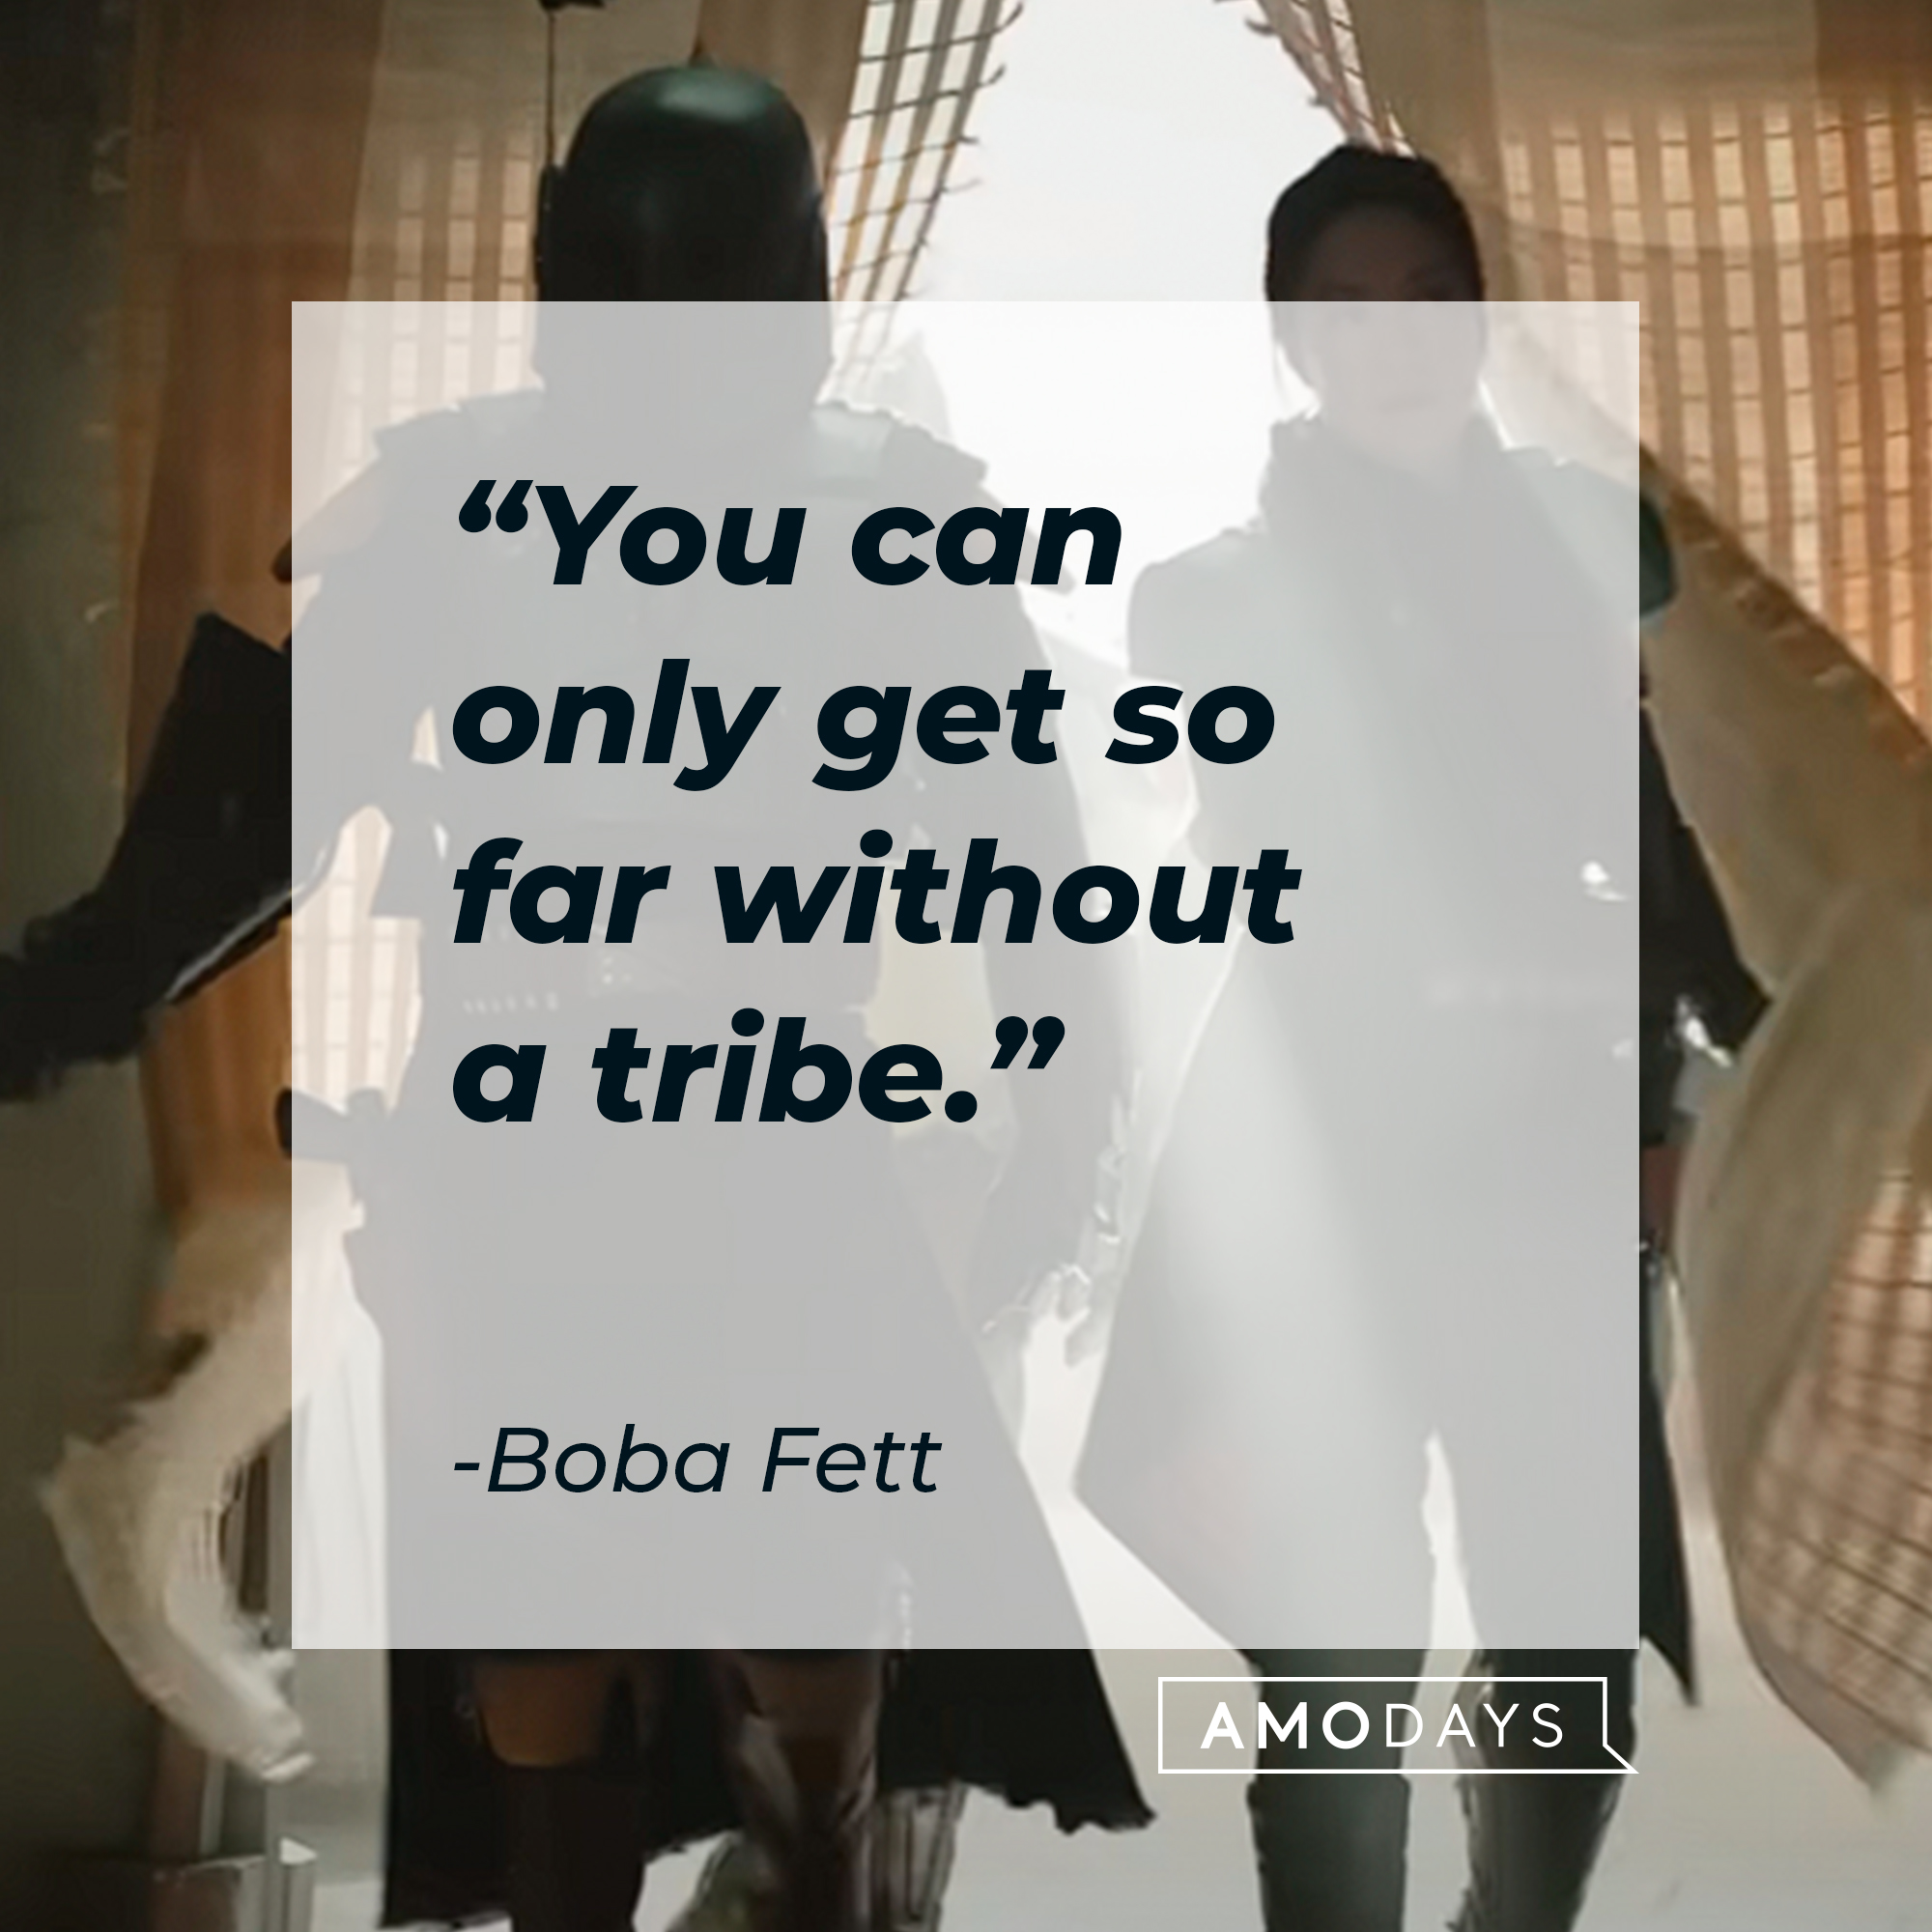 Boba Fett, with his quote: “You can only get so far without a tribe.” │ Source: youtube.com/StarWars